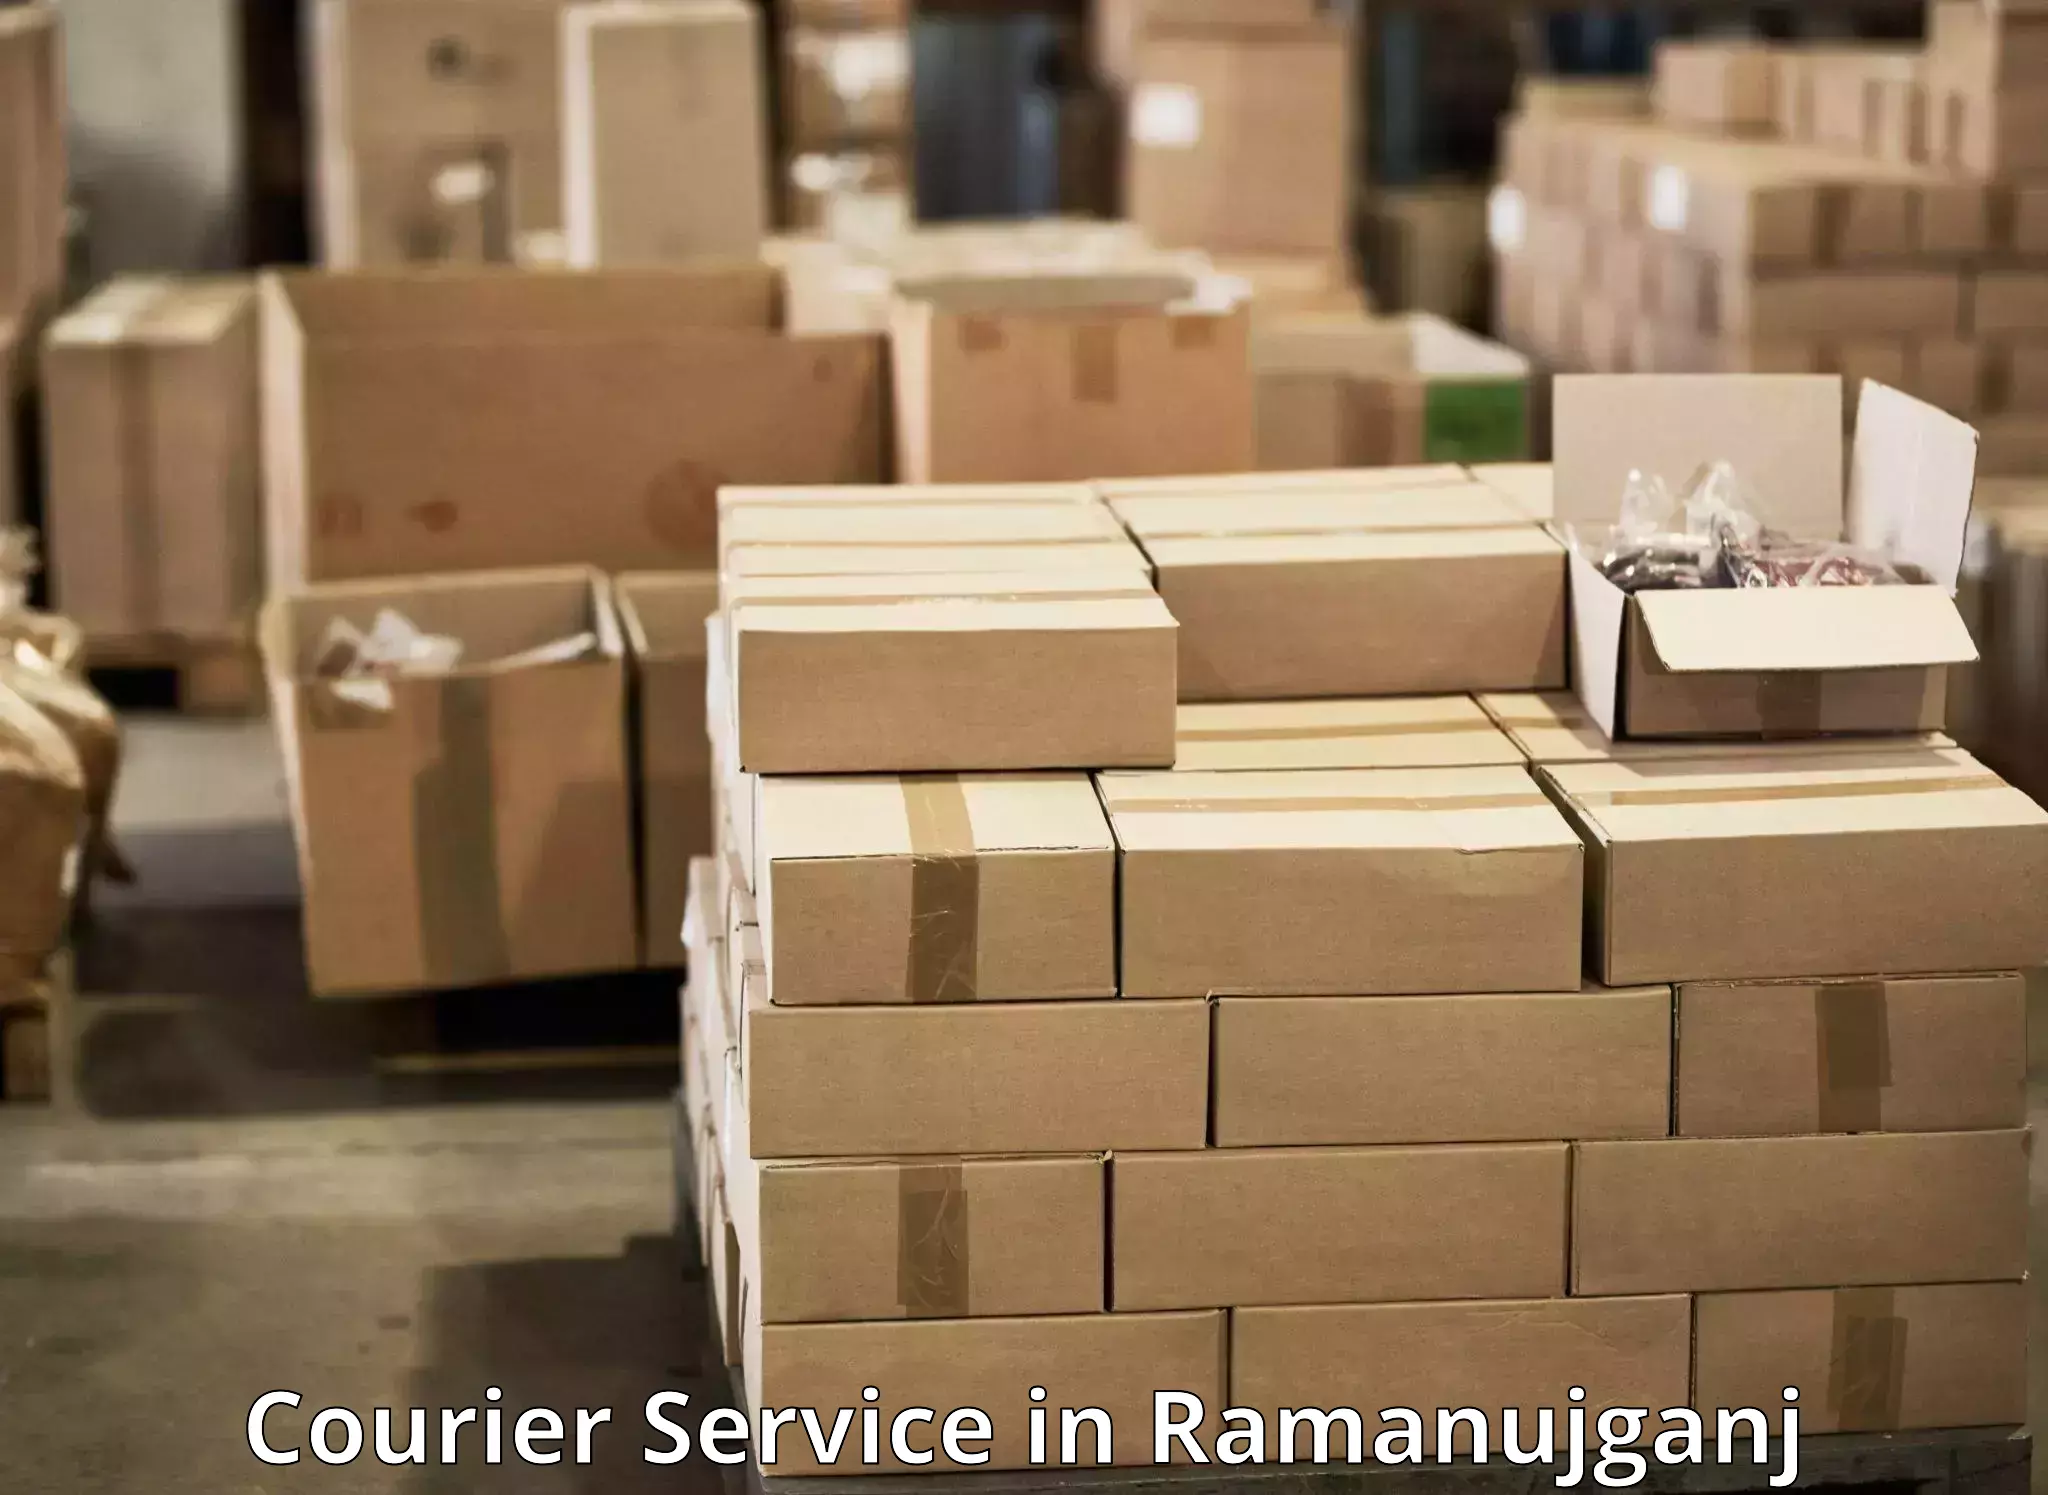 Next-day freight services in Ramanujganj